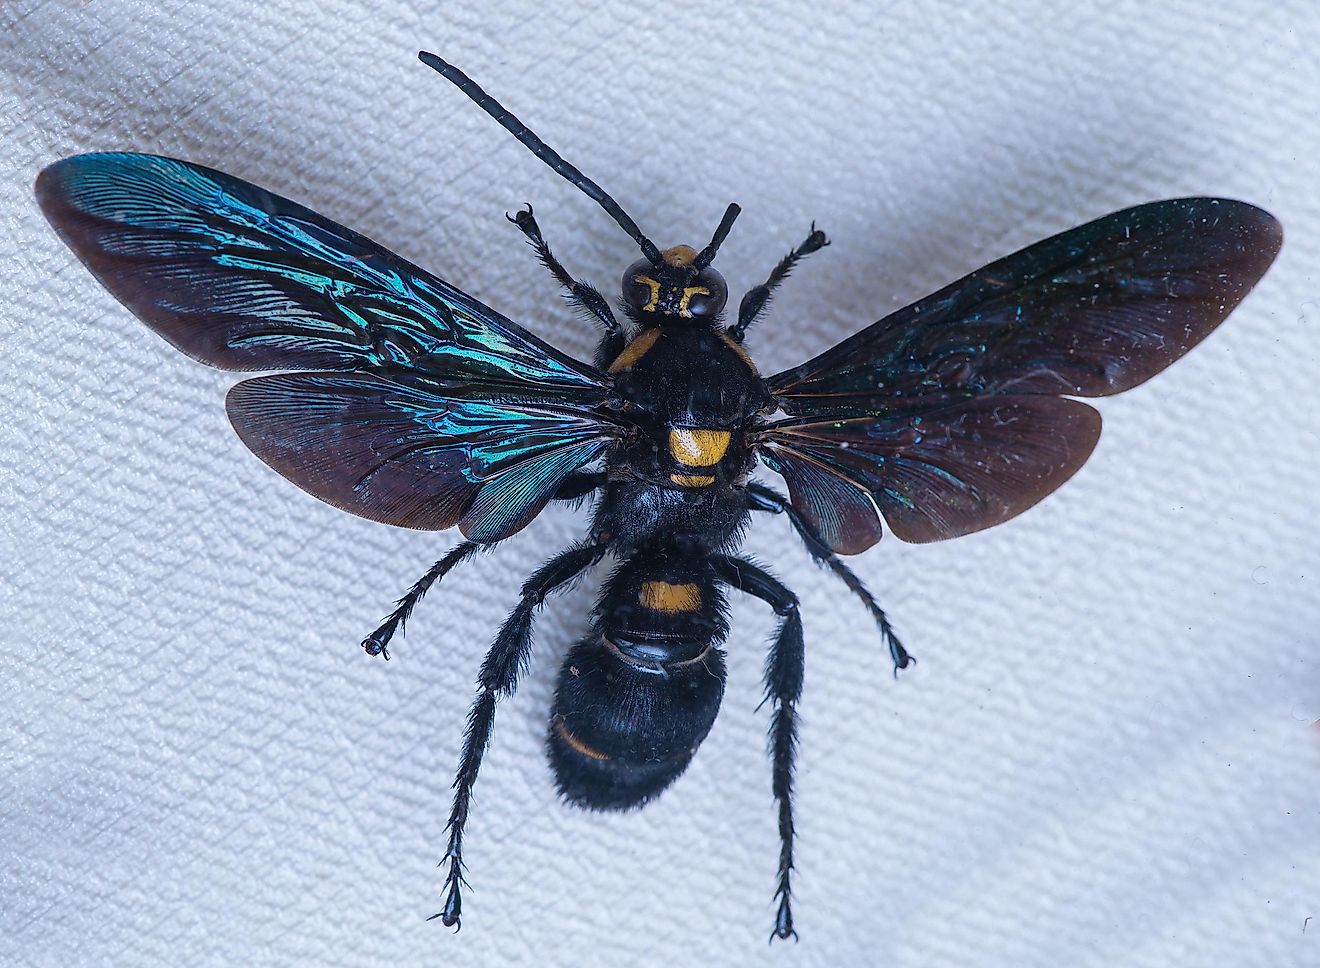 Giant Scoliid Wasps, also known as Megascolia procer, are solitary wasps that can be found around Indonesia.